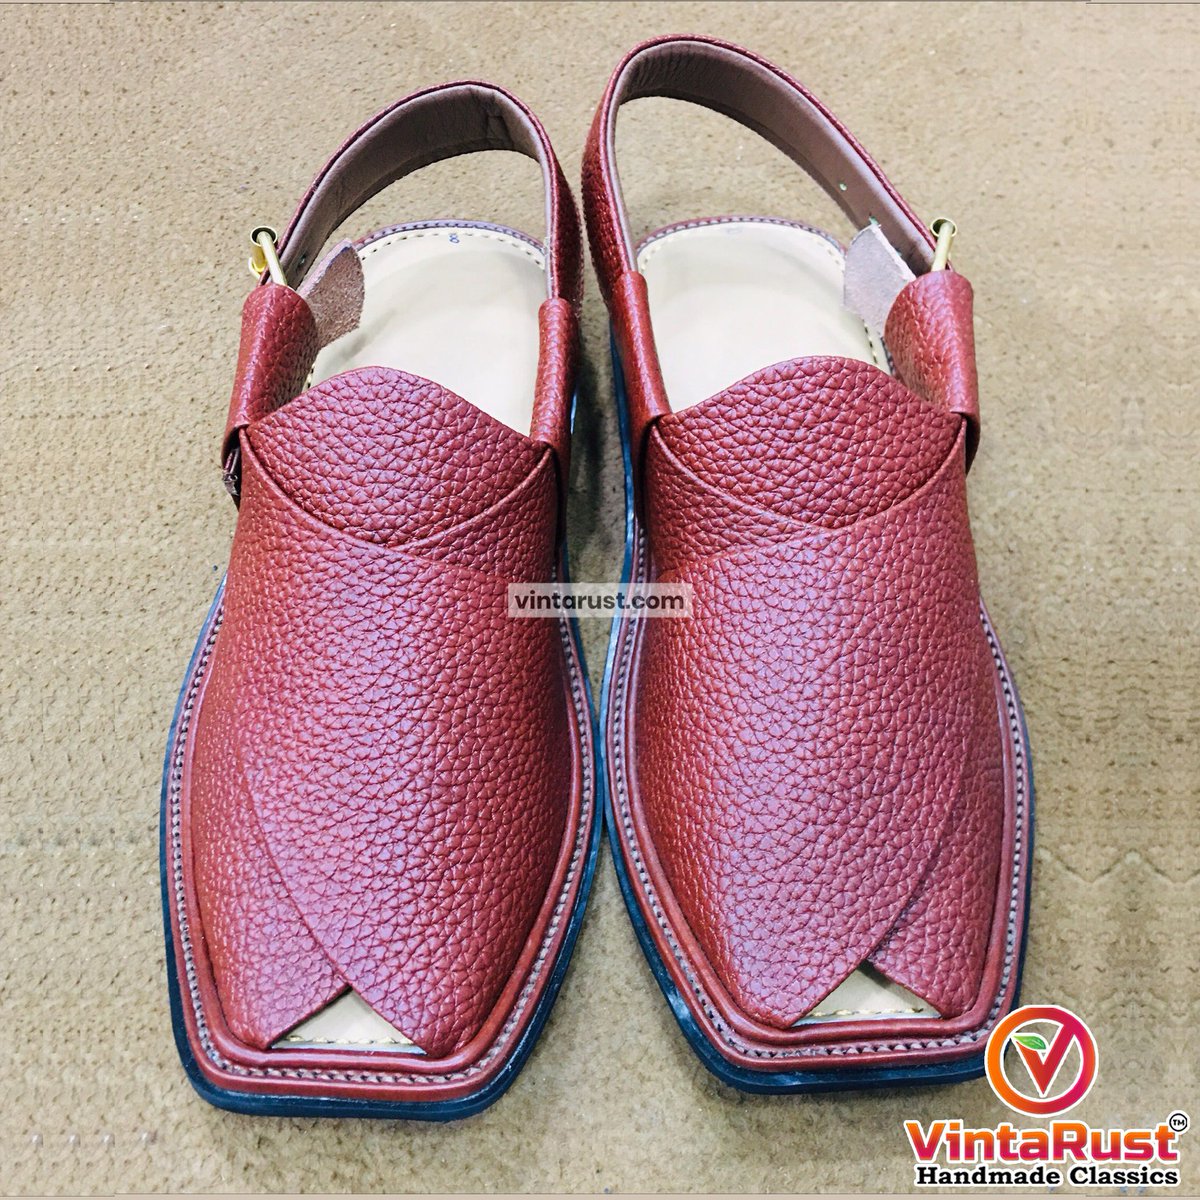 Handmade Peshawari Chappal For Men.

Get yours today!
buff.ly/3RBFJRe

#peshawarichappals #menssandals #leathersandals #handmade #culturalfashion #festivalfashion #summershoes #comfortshoes #standoutshoes #mensaccessories #ethnicshoes #fathersdaygift #shopsmall